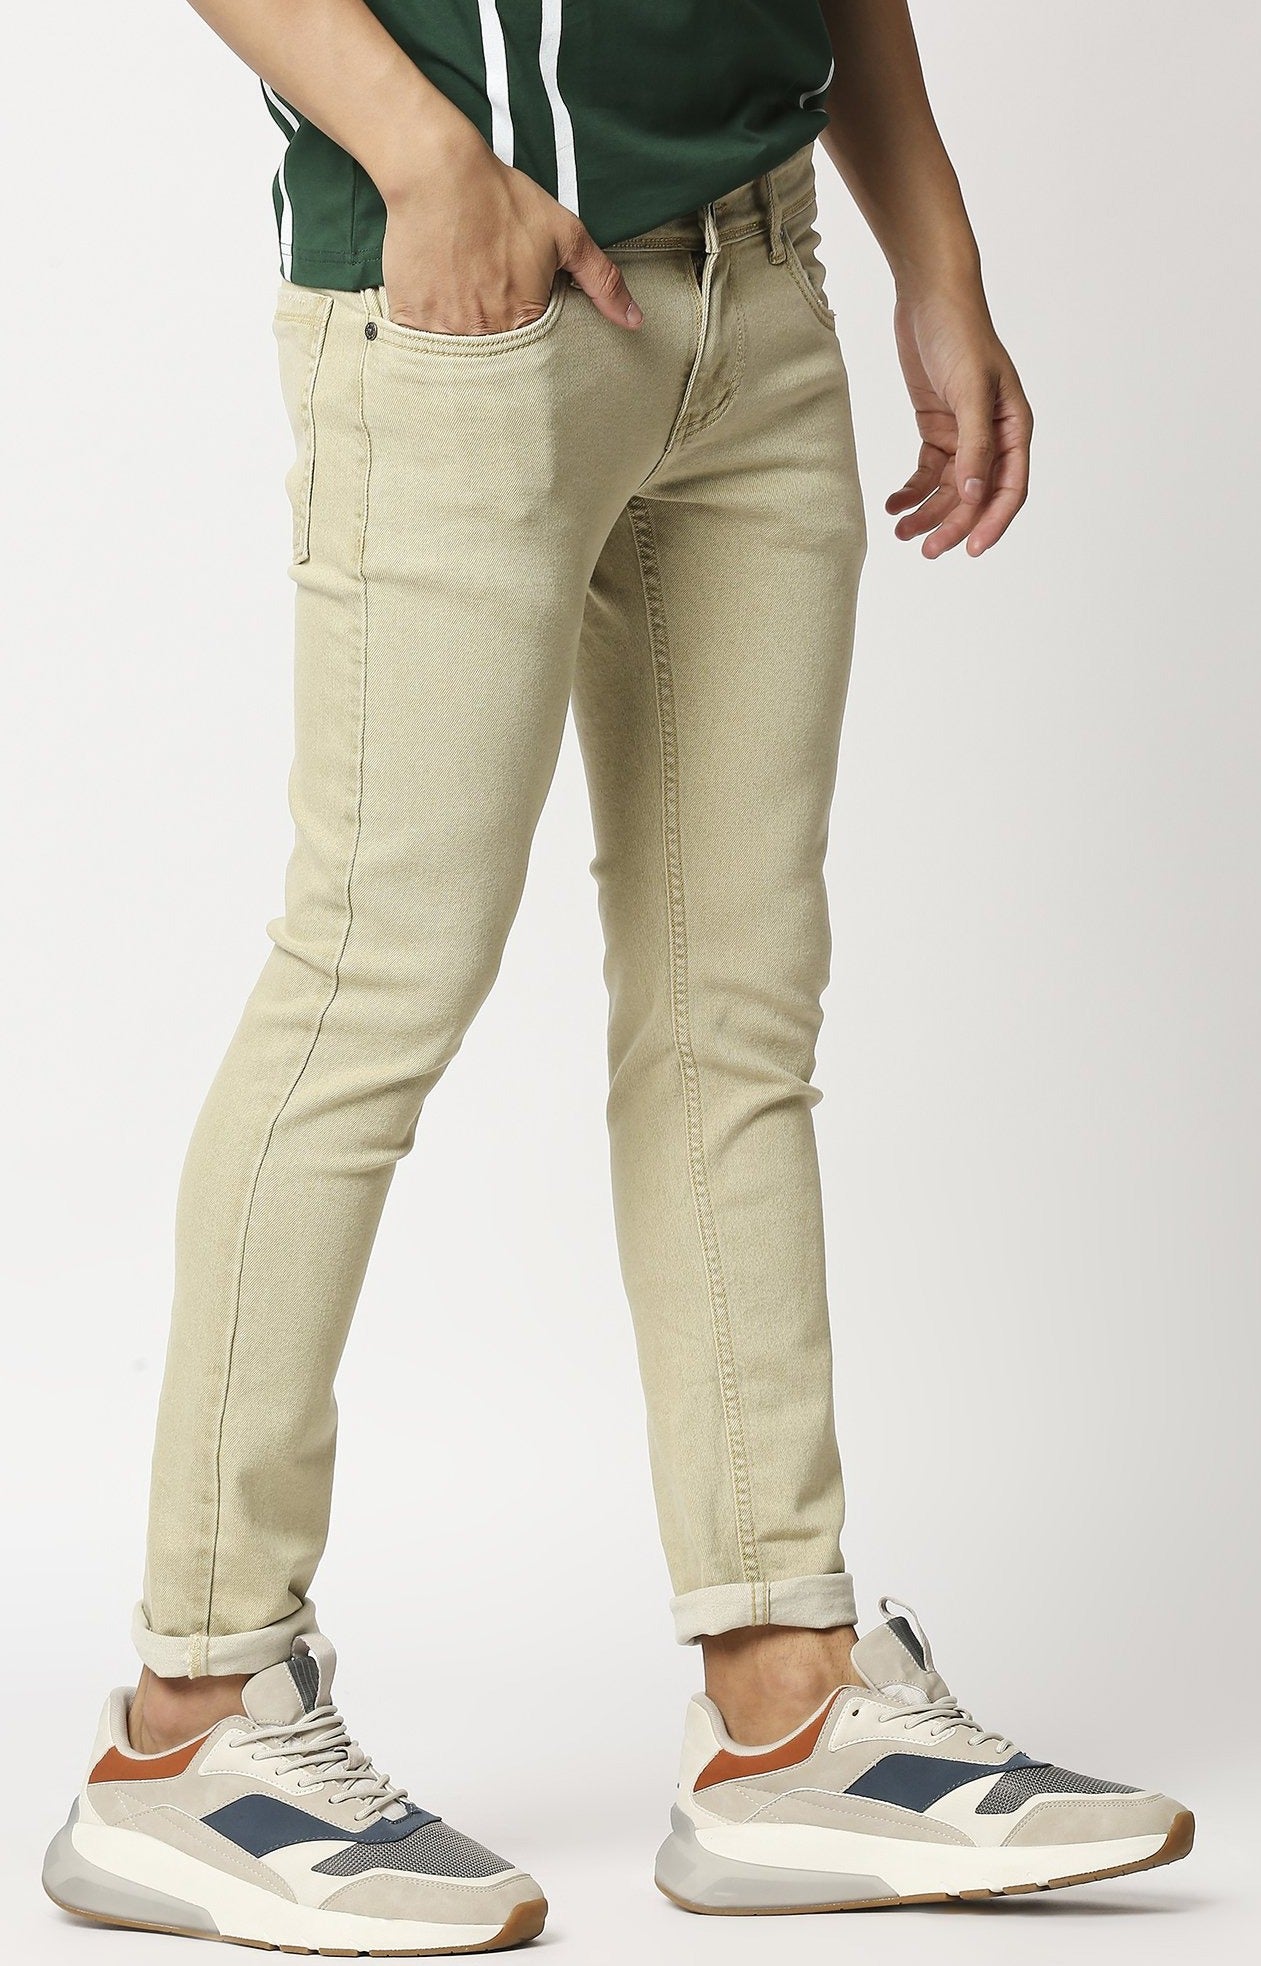 Southern Tide The New Channel Marker Chino Pant| Island Pursuit